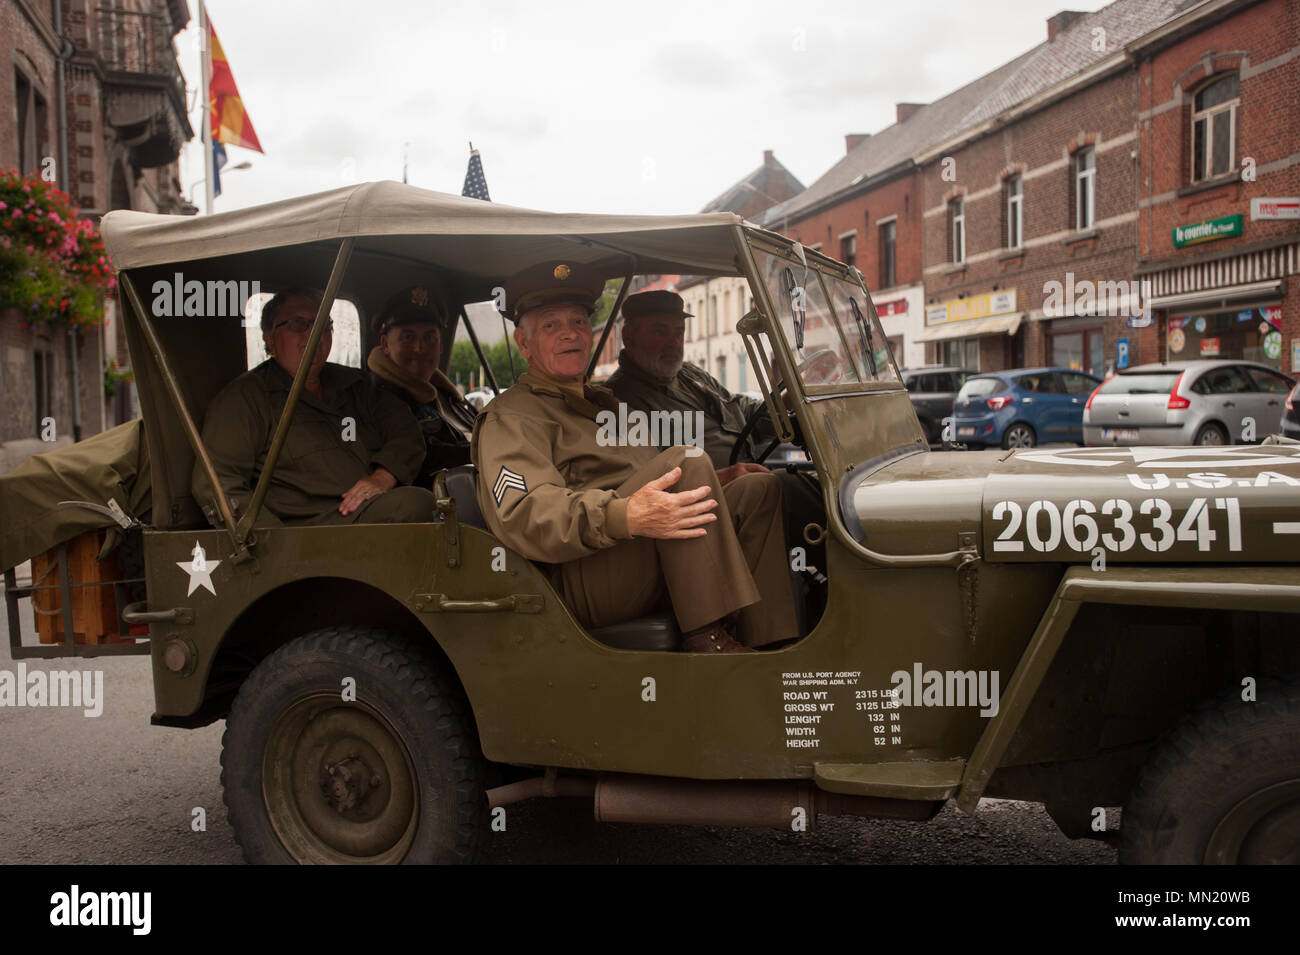 Participants drive in a march during the memorial ceremony for Belgian Lt. Col. Joseph Daumerie, Aug. 15, 2017, Brugelette, Belgium. . The memorial commemorates the 75th anniversary of Daumerie's death. Daumerie is a war hero and fighter pilot who was executed in 1942 during World War II. The event offered a unique opportunity for the U.S. service members to honor a fallen hero and strengthen their relationship with NATO allies during the U.S. Army Garrison Benelux's 50th anniversary in Belgium. (U.S. Navy Photo by Information System Technician Seaman Daniel Gallegos/Released) Stock Photo